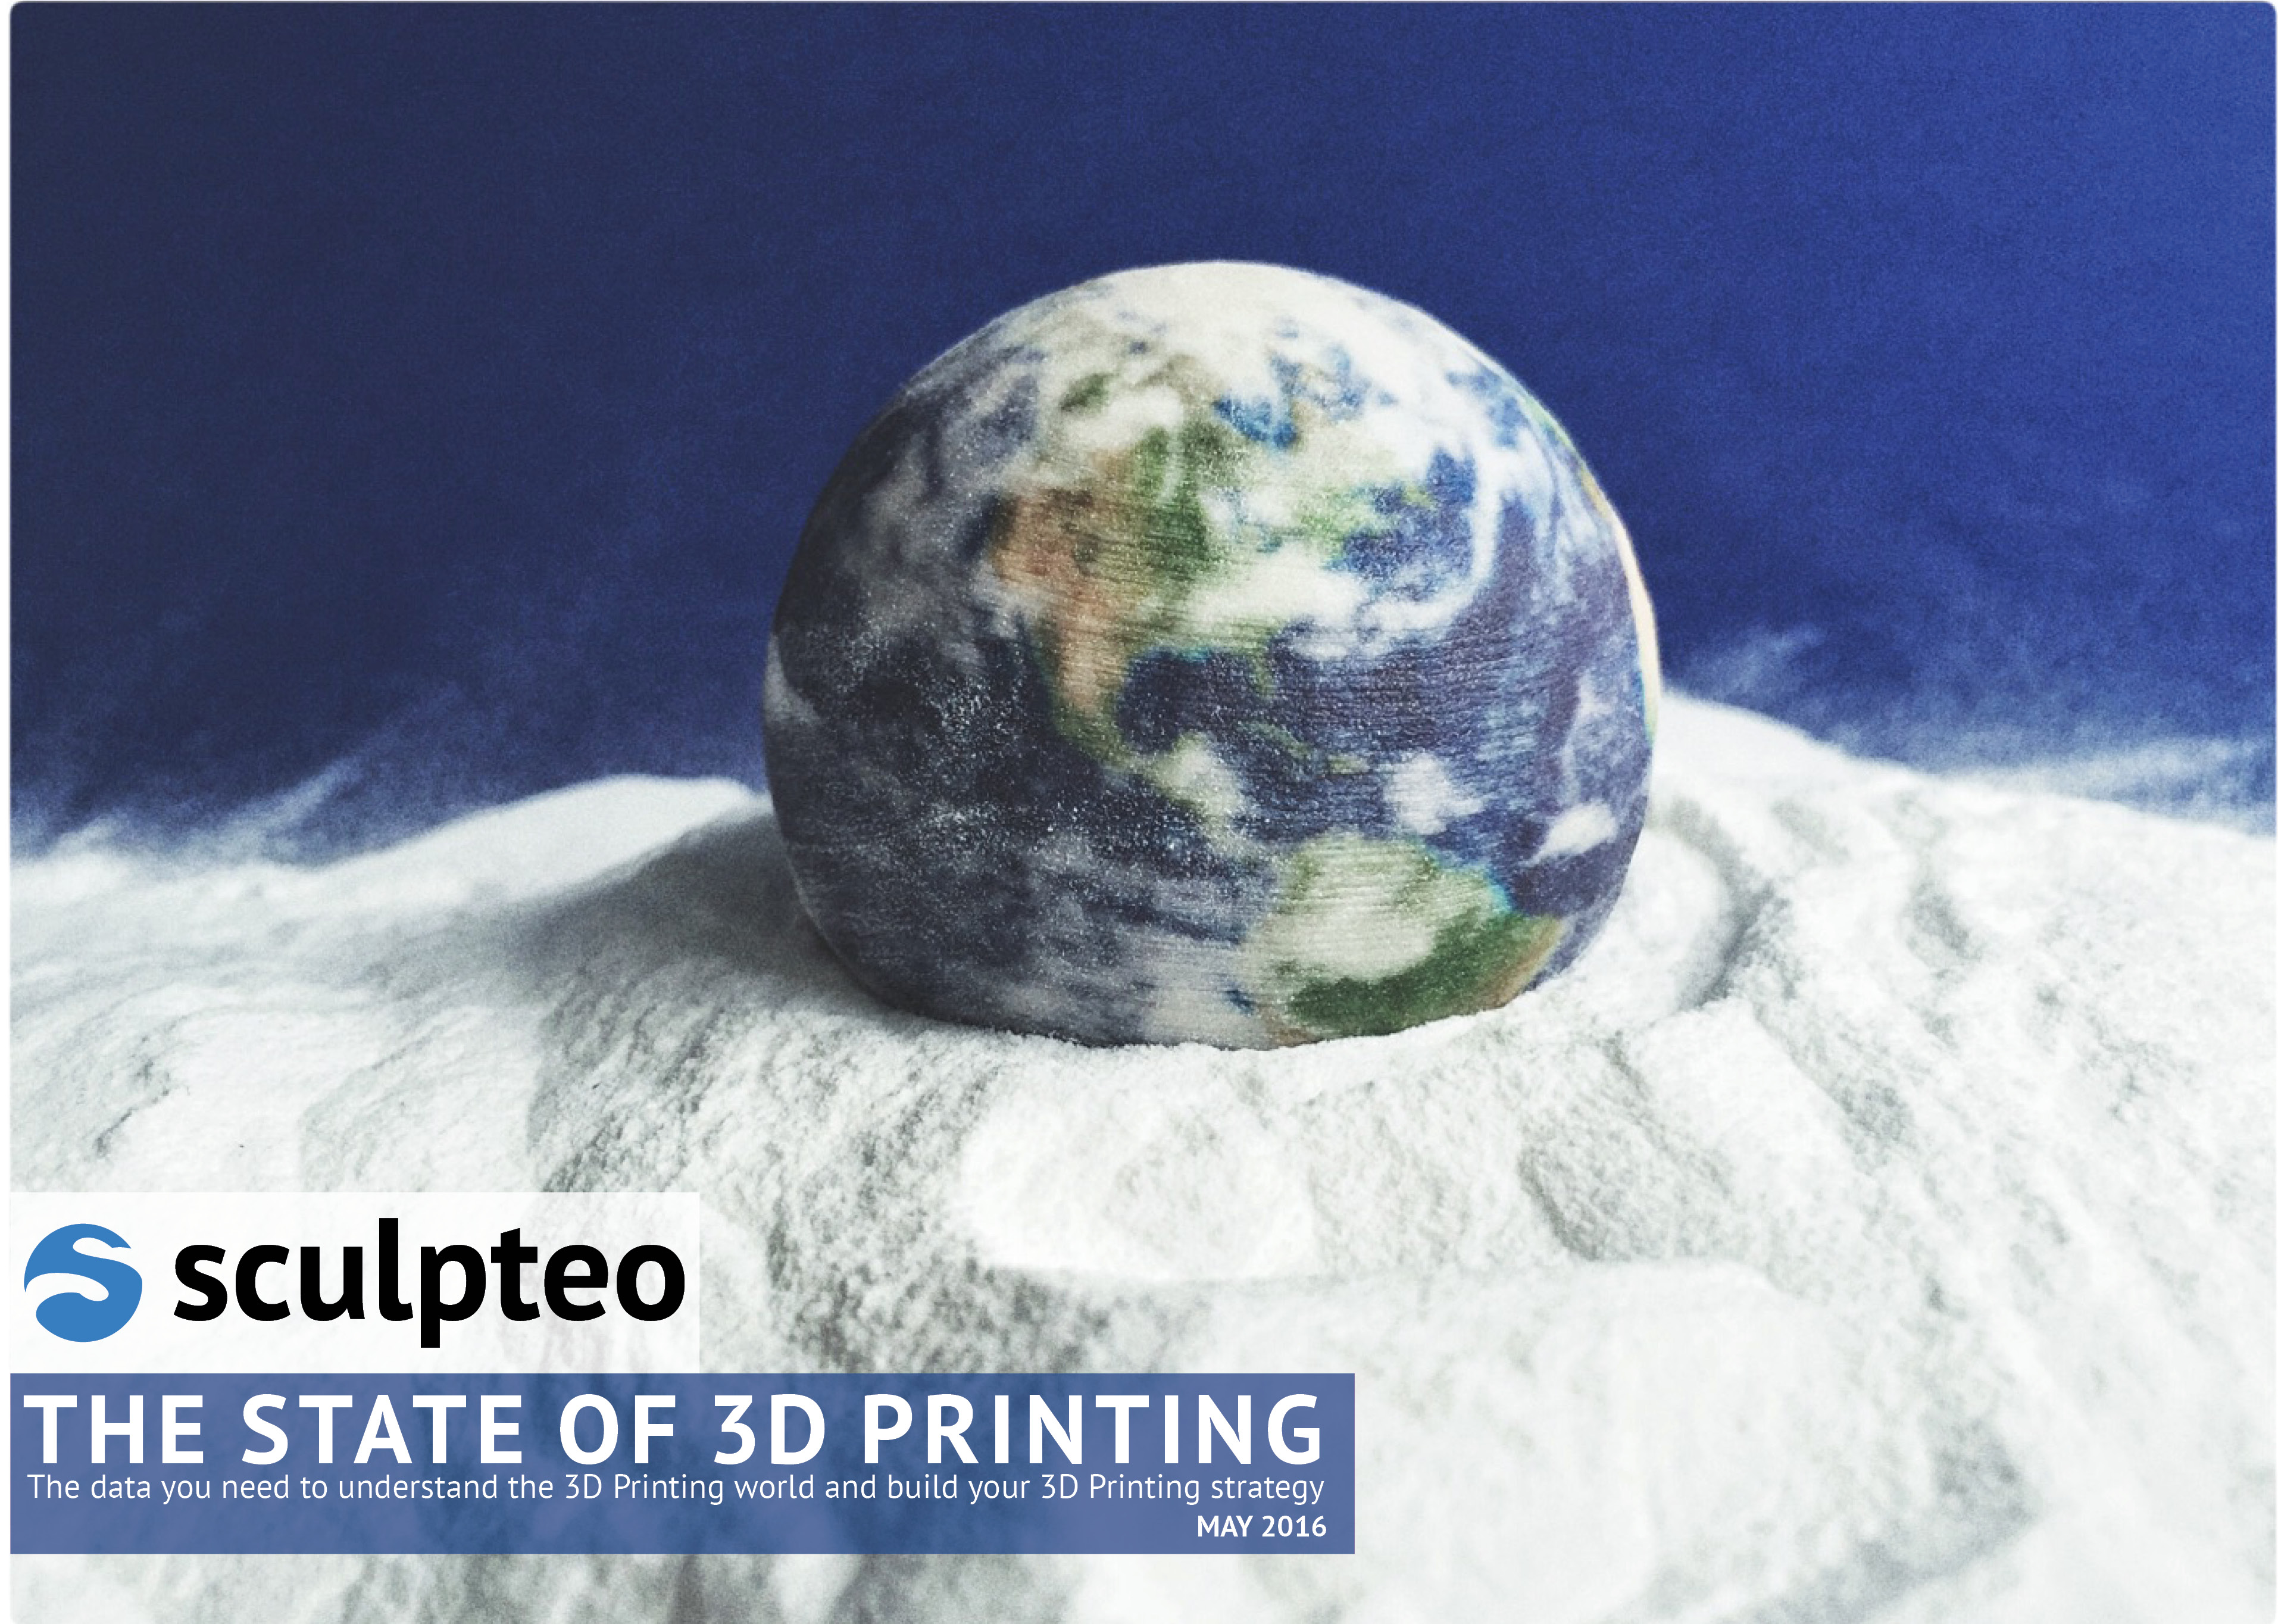 Insight from the State of 3D Printing:  the year-over-year contrast